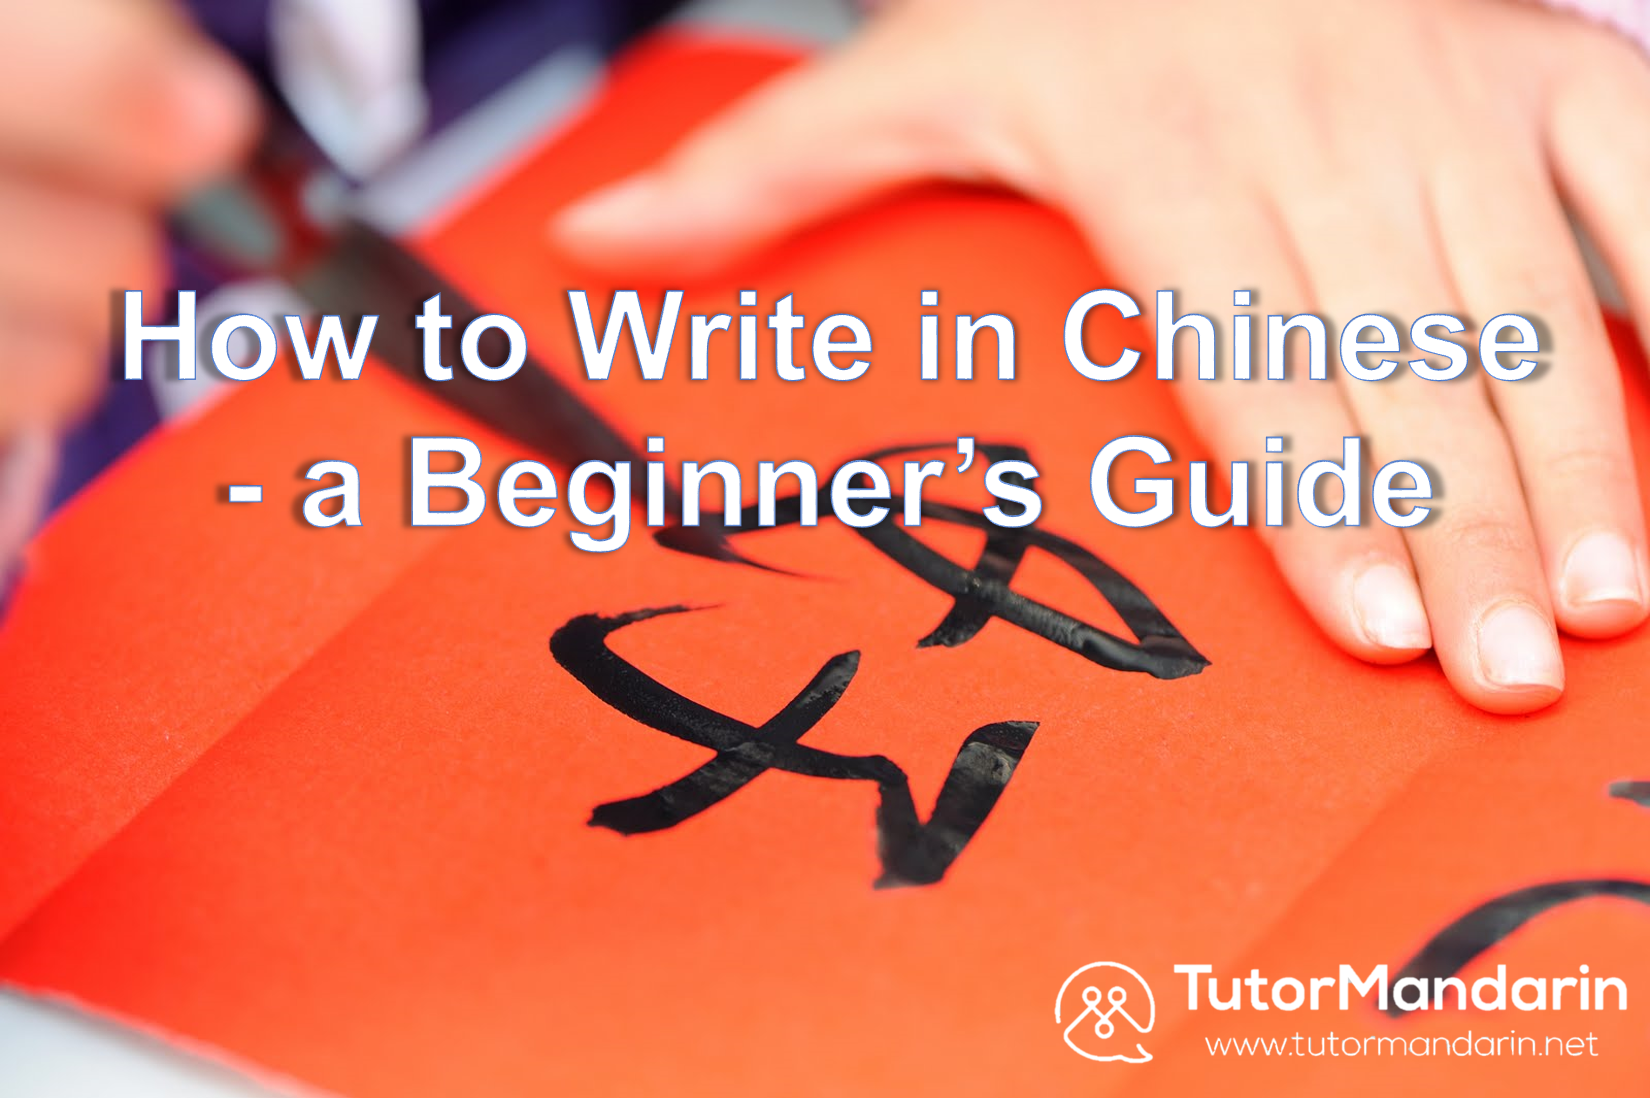 a Beginner guide in Chinese writing